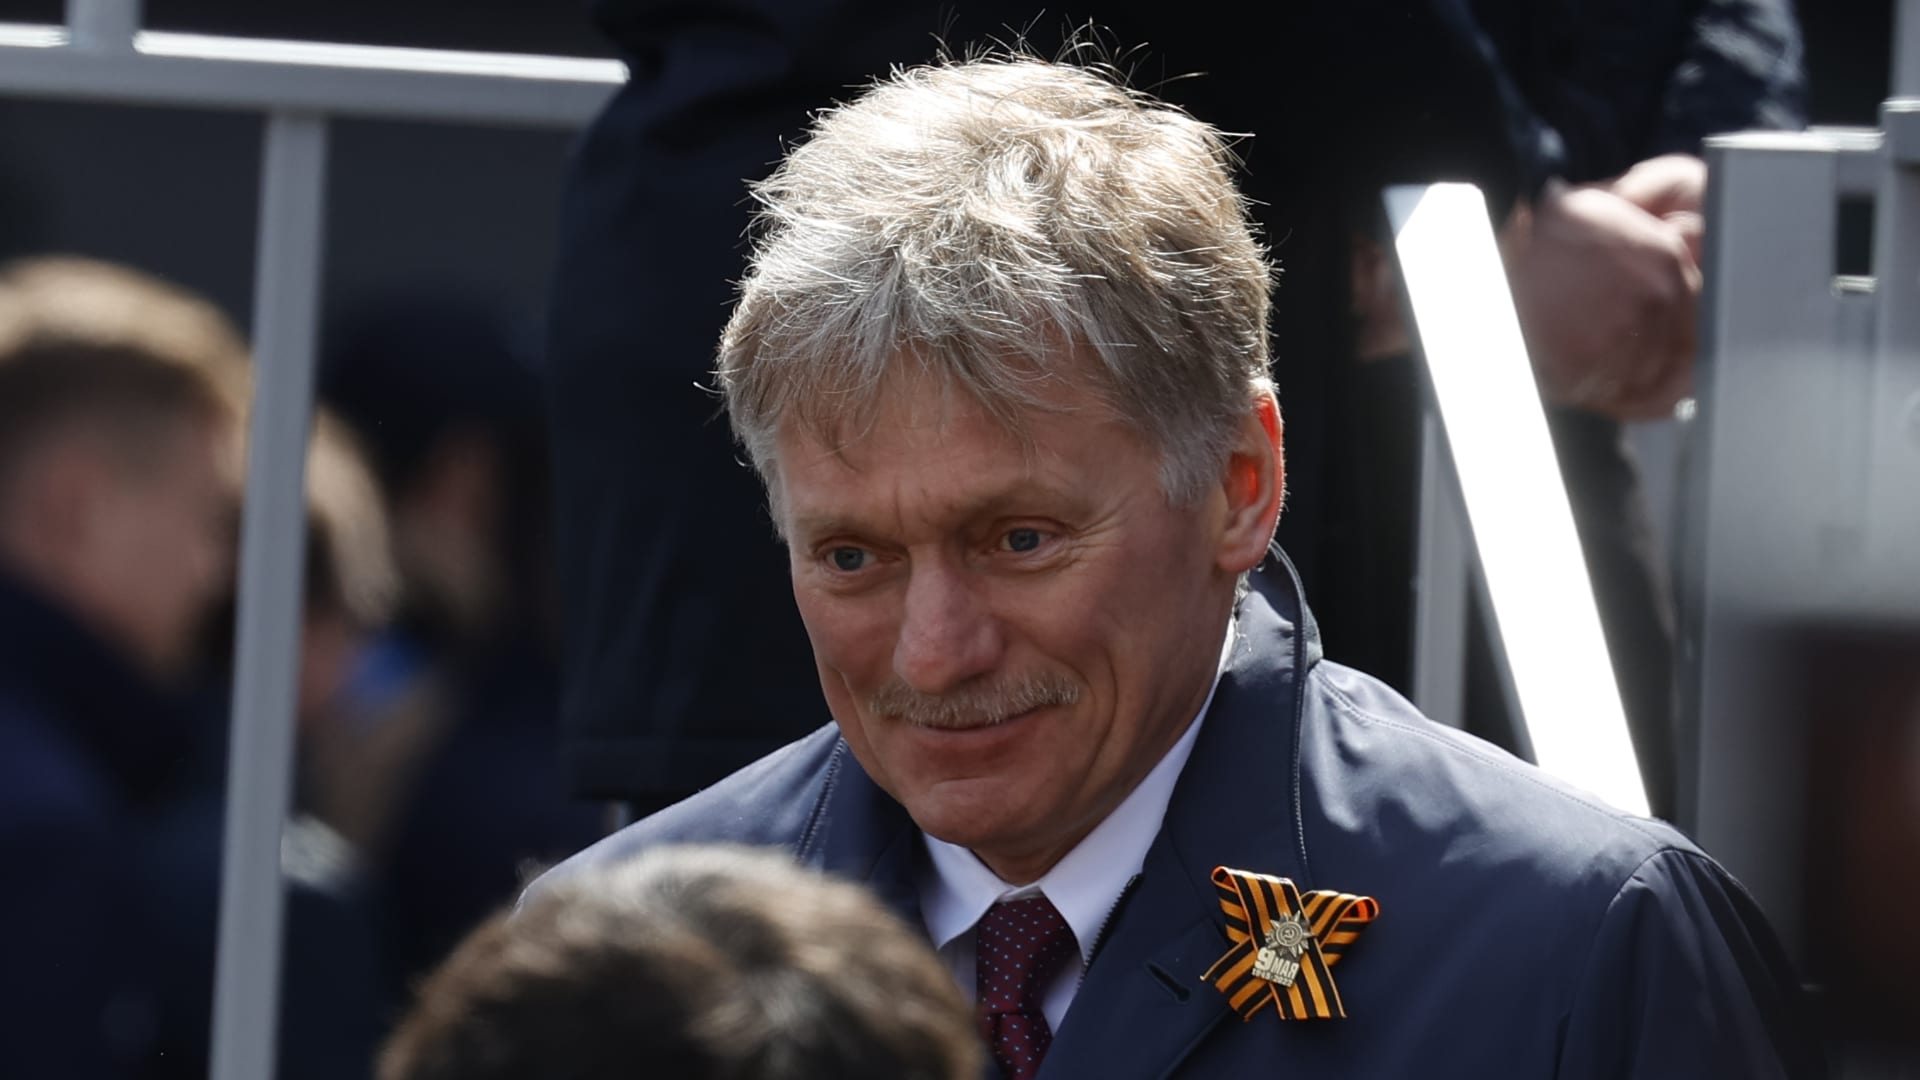 Kremlin spokesman Dmitry Peskov at an event during Russia's Victory Day commemorations in Moscow on May 9, 2022.